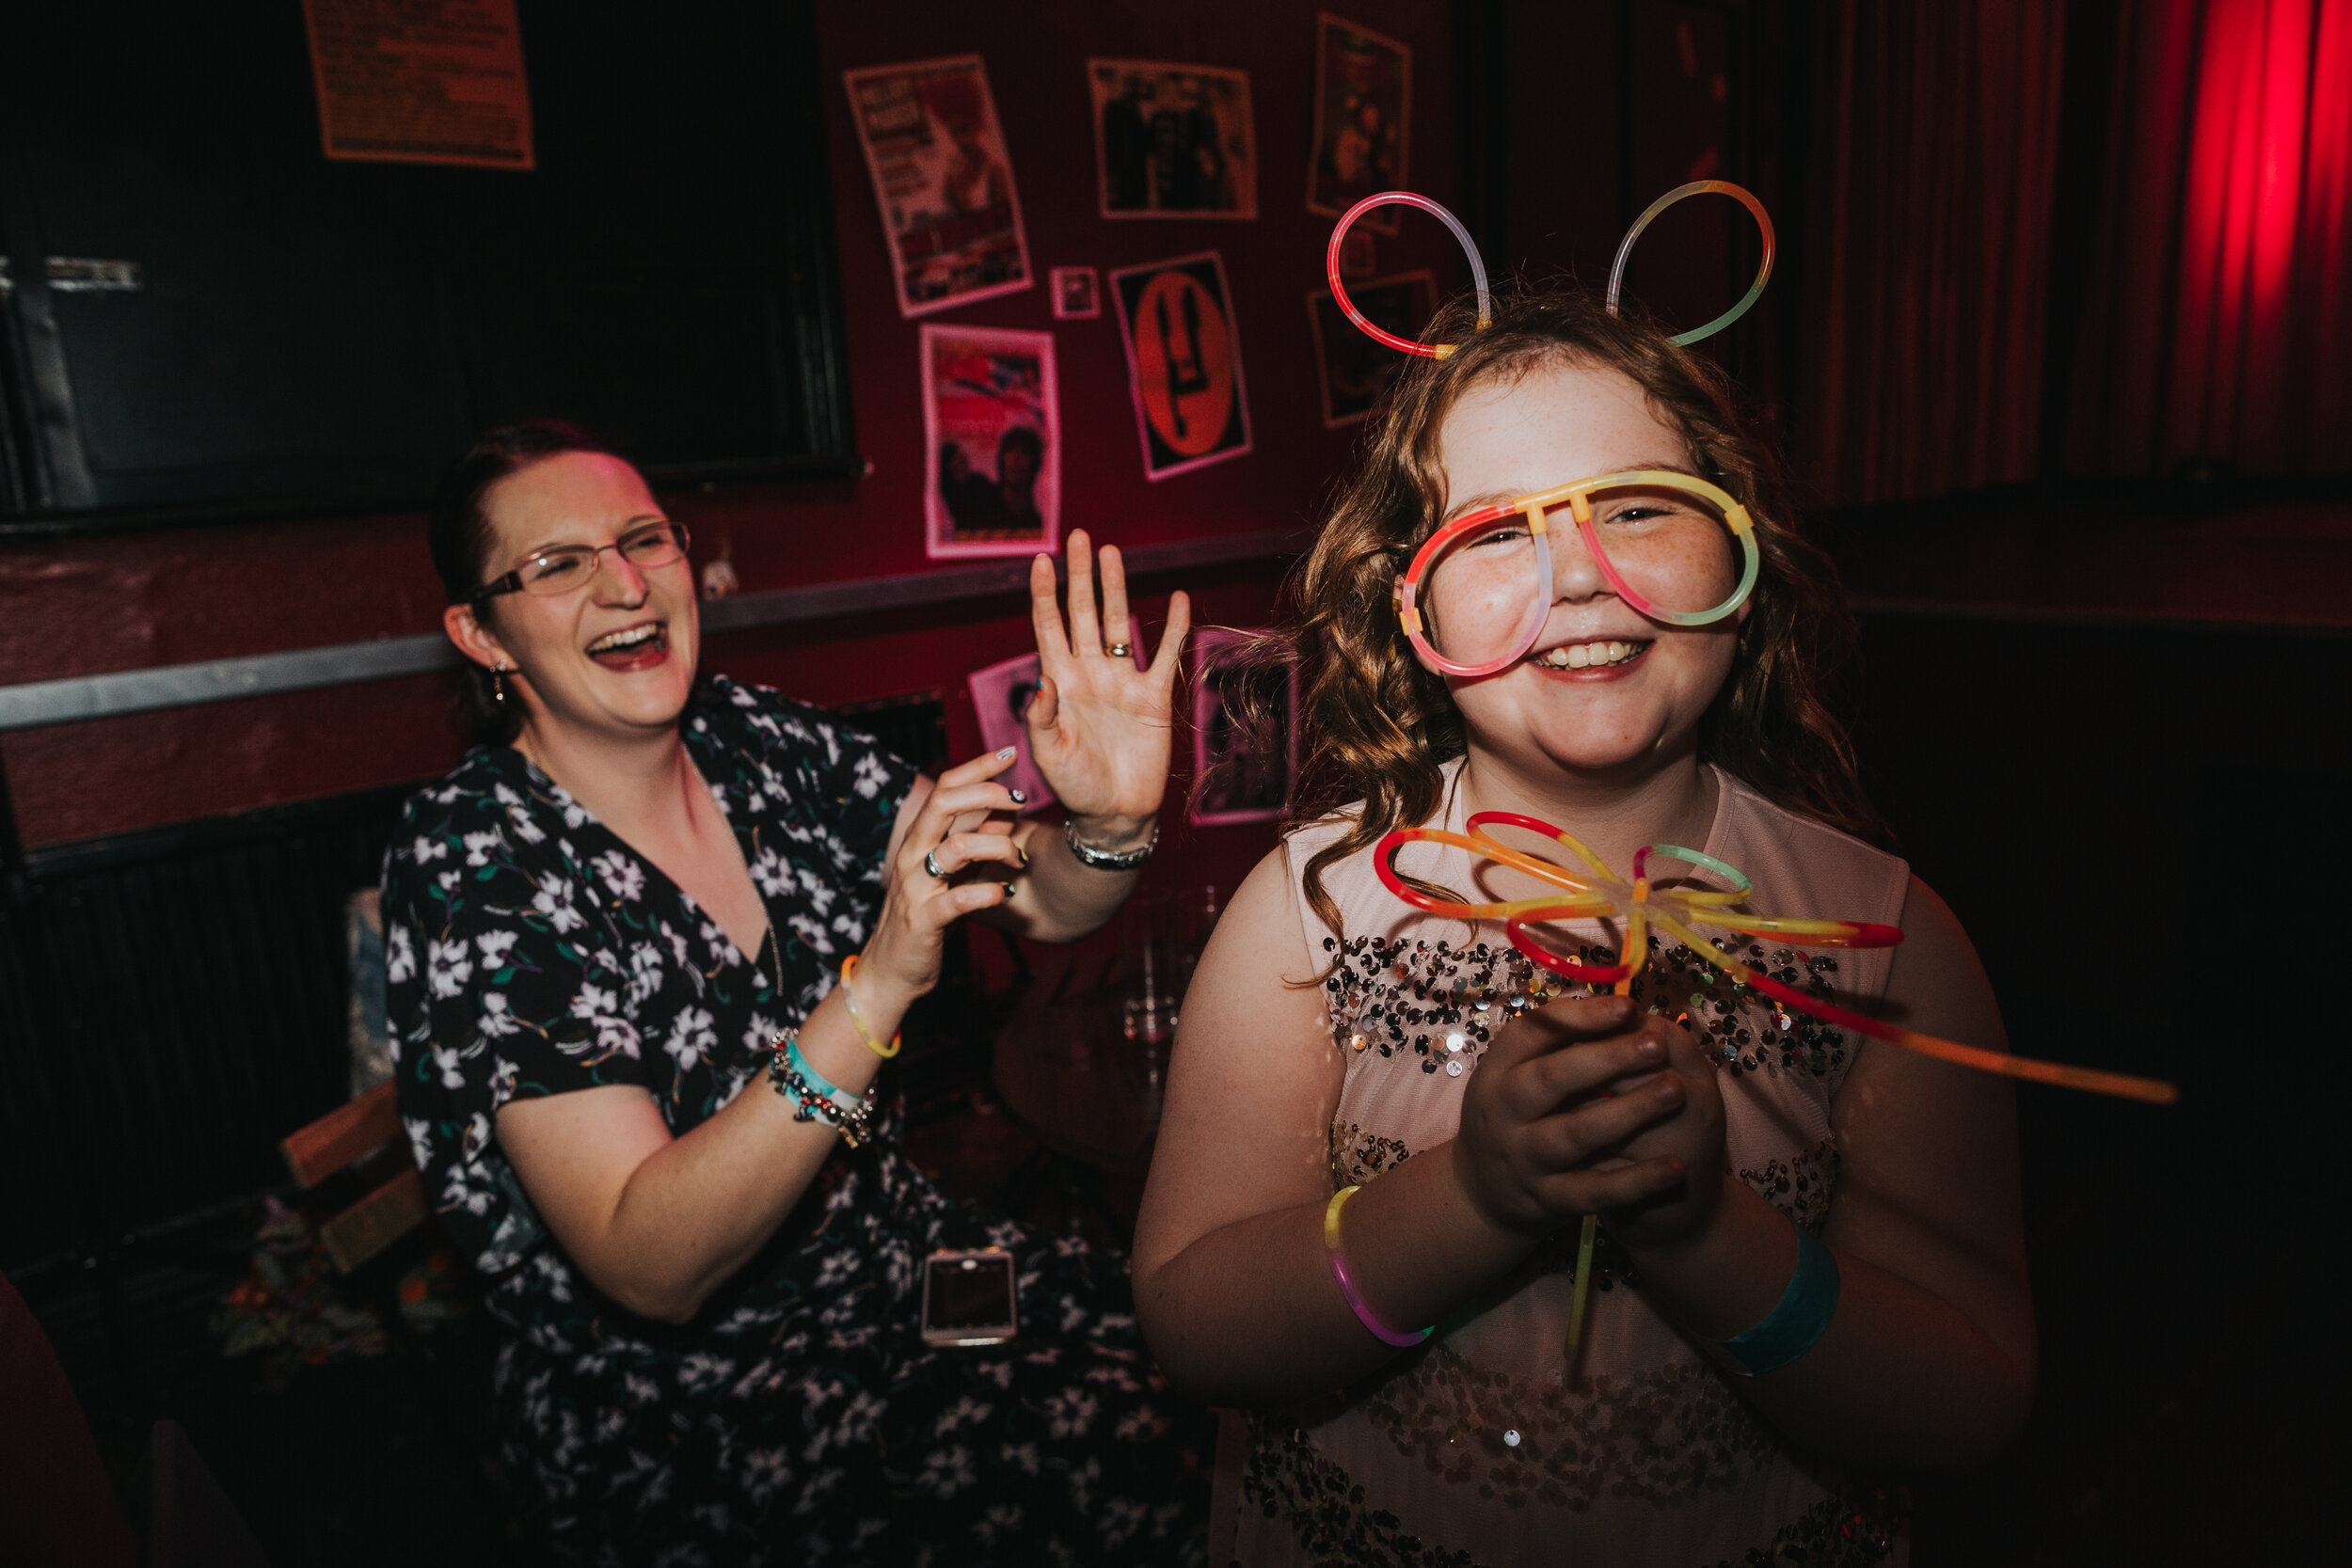 Child wearing glow stick bunny ears and glasses at pub wedding party.  (Copy)